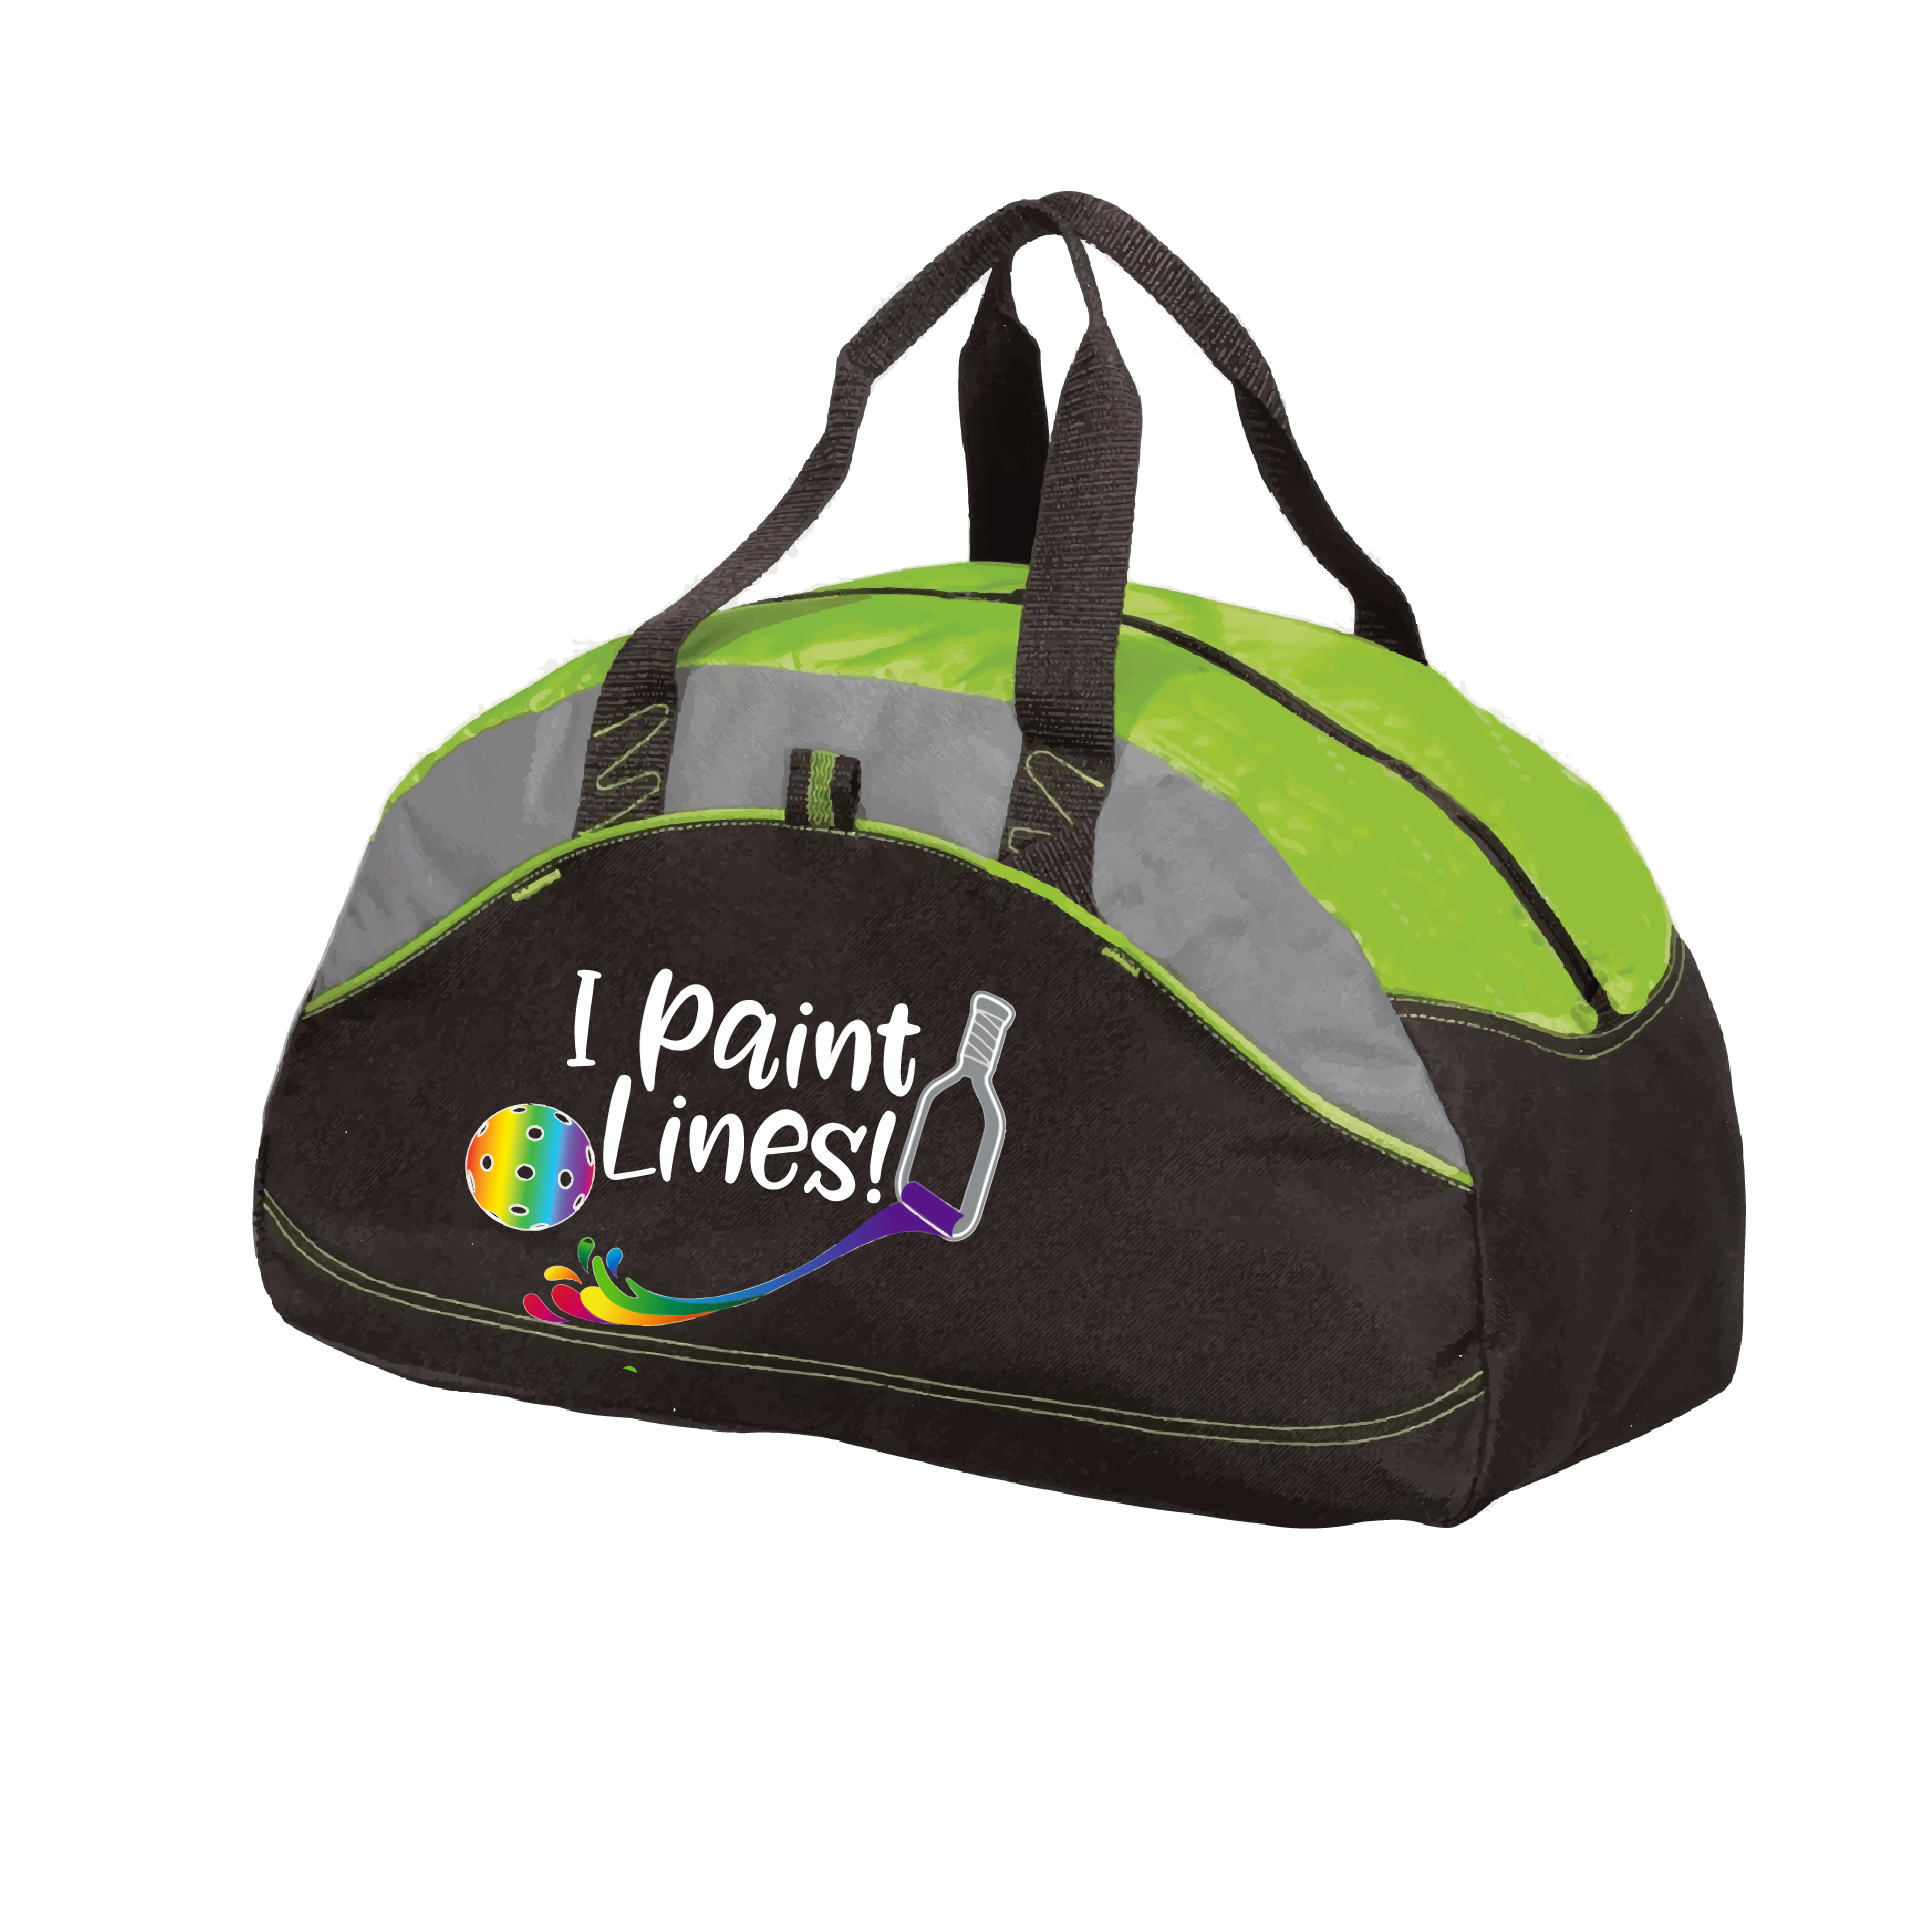 Pickleball Bag Design: I Paint Lines  Carry your gear in comfort and style. This fun pickleball duffel bag is the perfect accessory for all pickleball players needing to keep their gear in one place. This medium sized duffel tote is ideal for all your pickleball activities. The large center compartment allows for plenty of space and the mesh end pocket is perfect for holding a water bottle. Duffel bag comes with an adjustable shoulder strap and the polyester material is durable and easily cleaned.